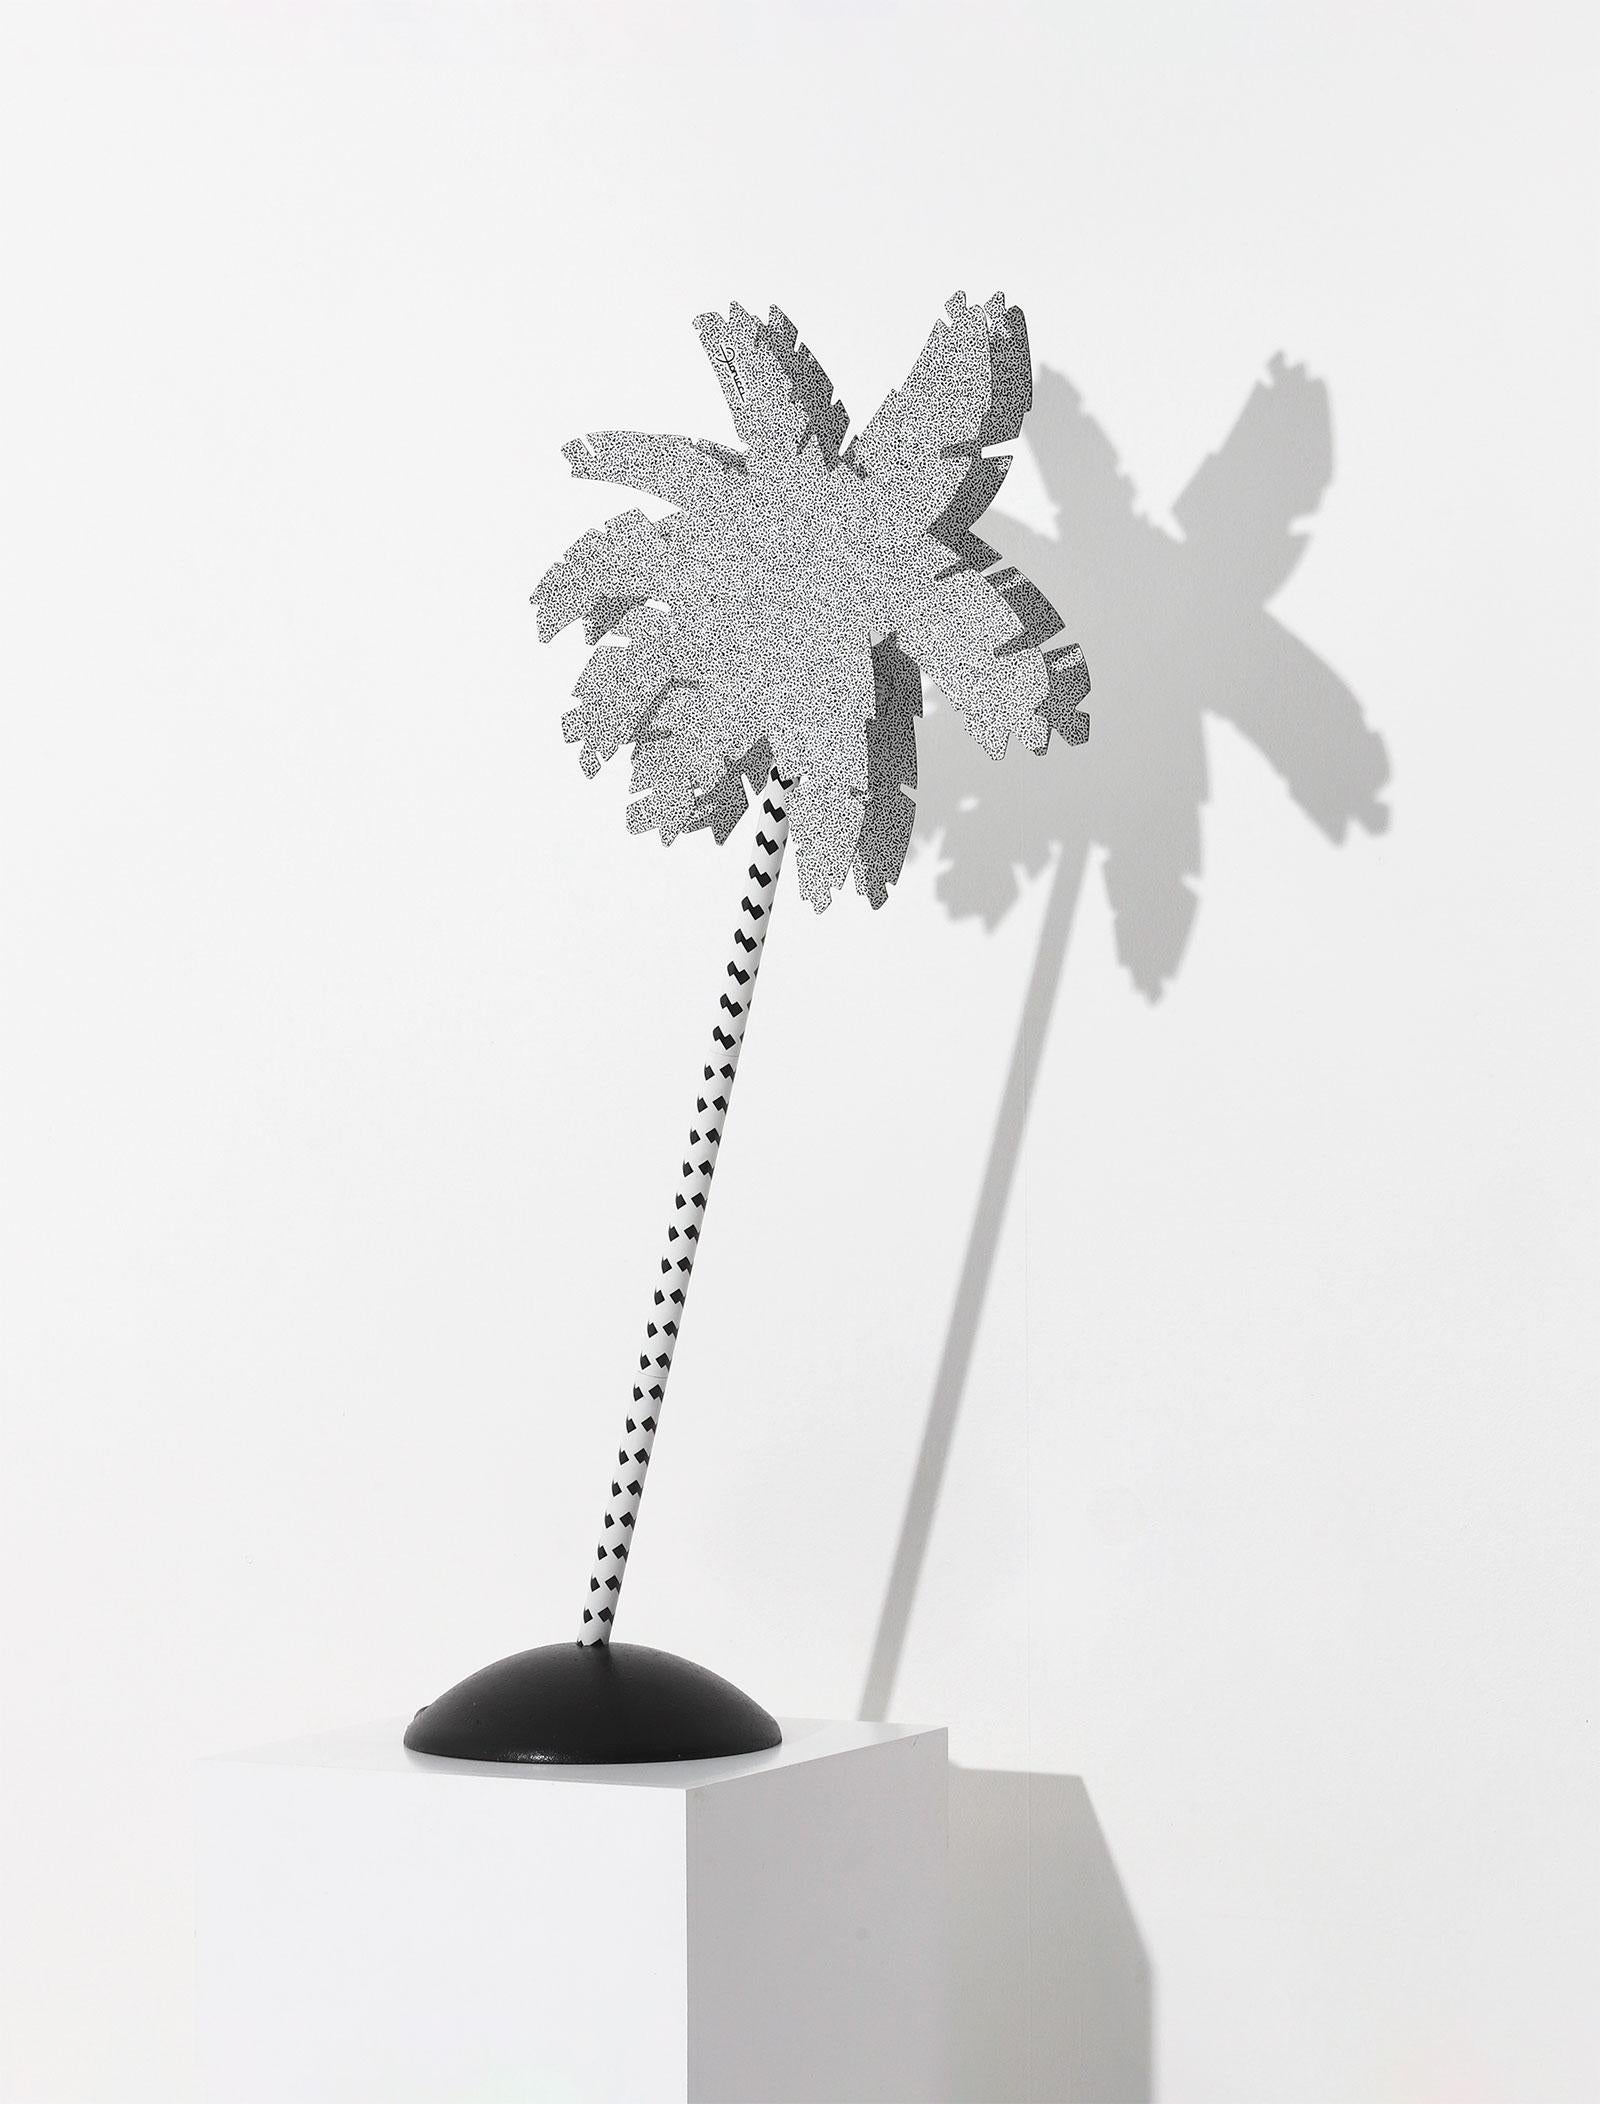 Fashion brand Fiorucci employed the most in-demand Italian architects to design the interiors of the stores, including Ettore Sottsass, Andrea Branzi, and Franco Marabelli. This Palmtree Caribe table lamp is one of the decorative attributes